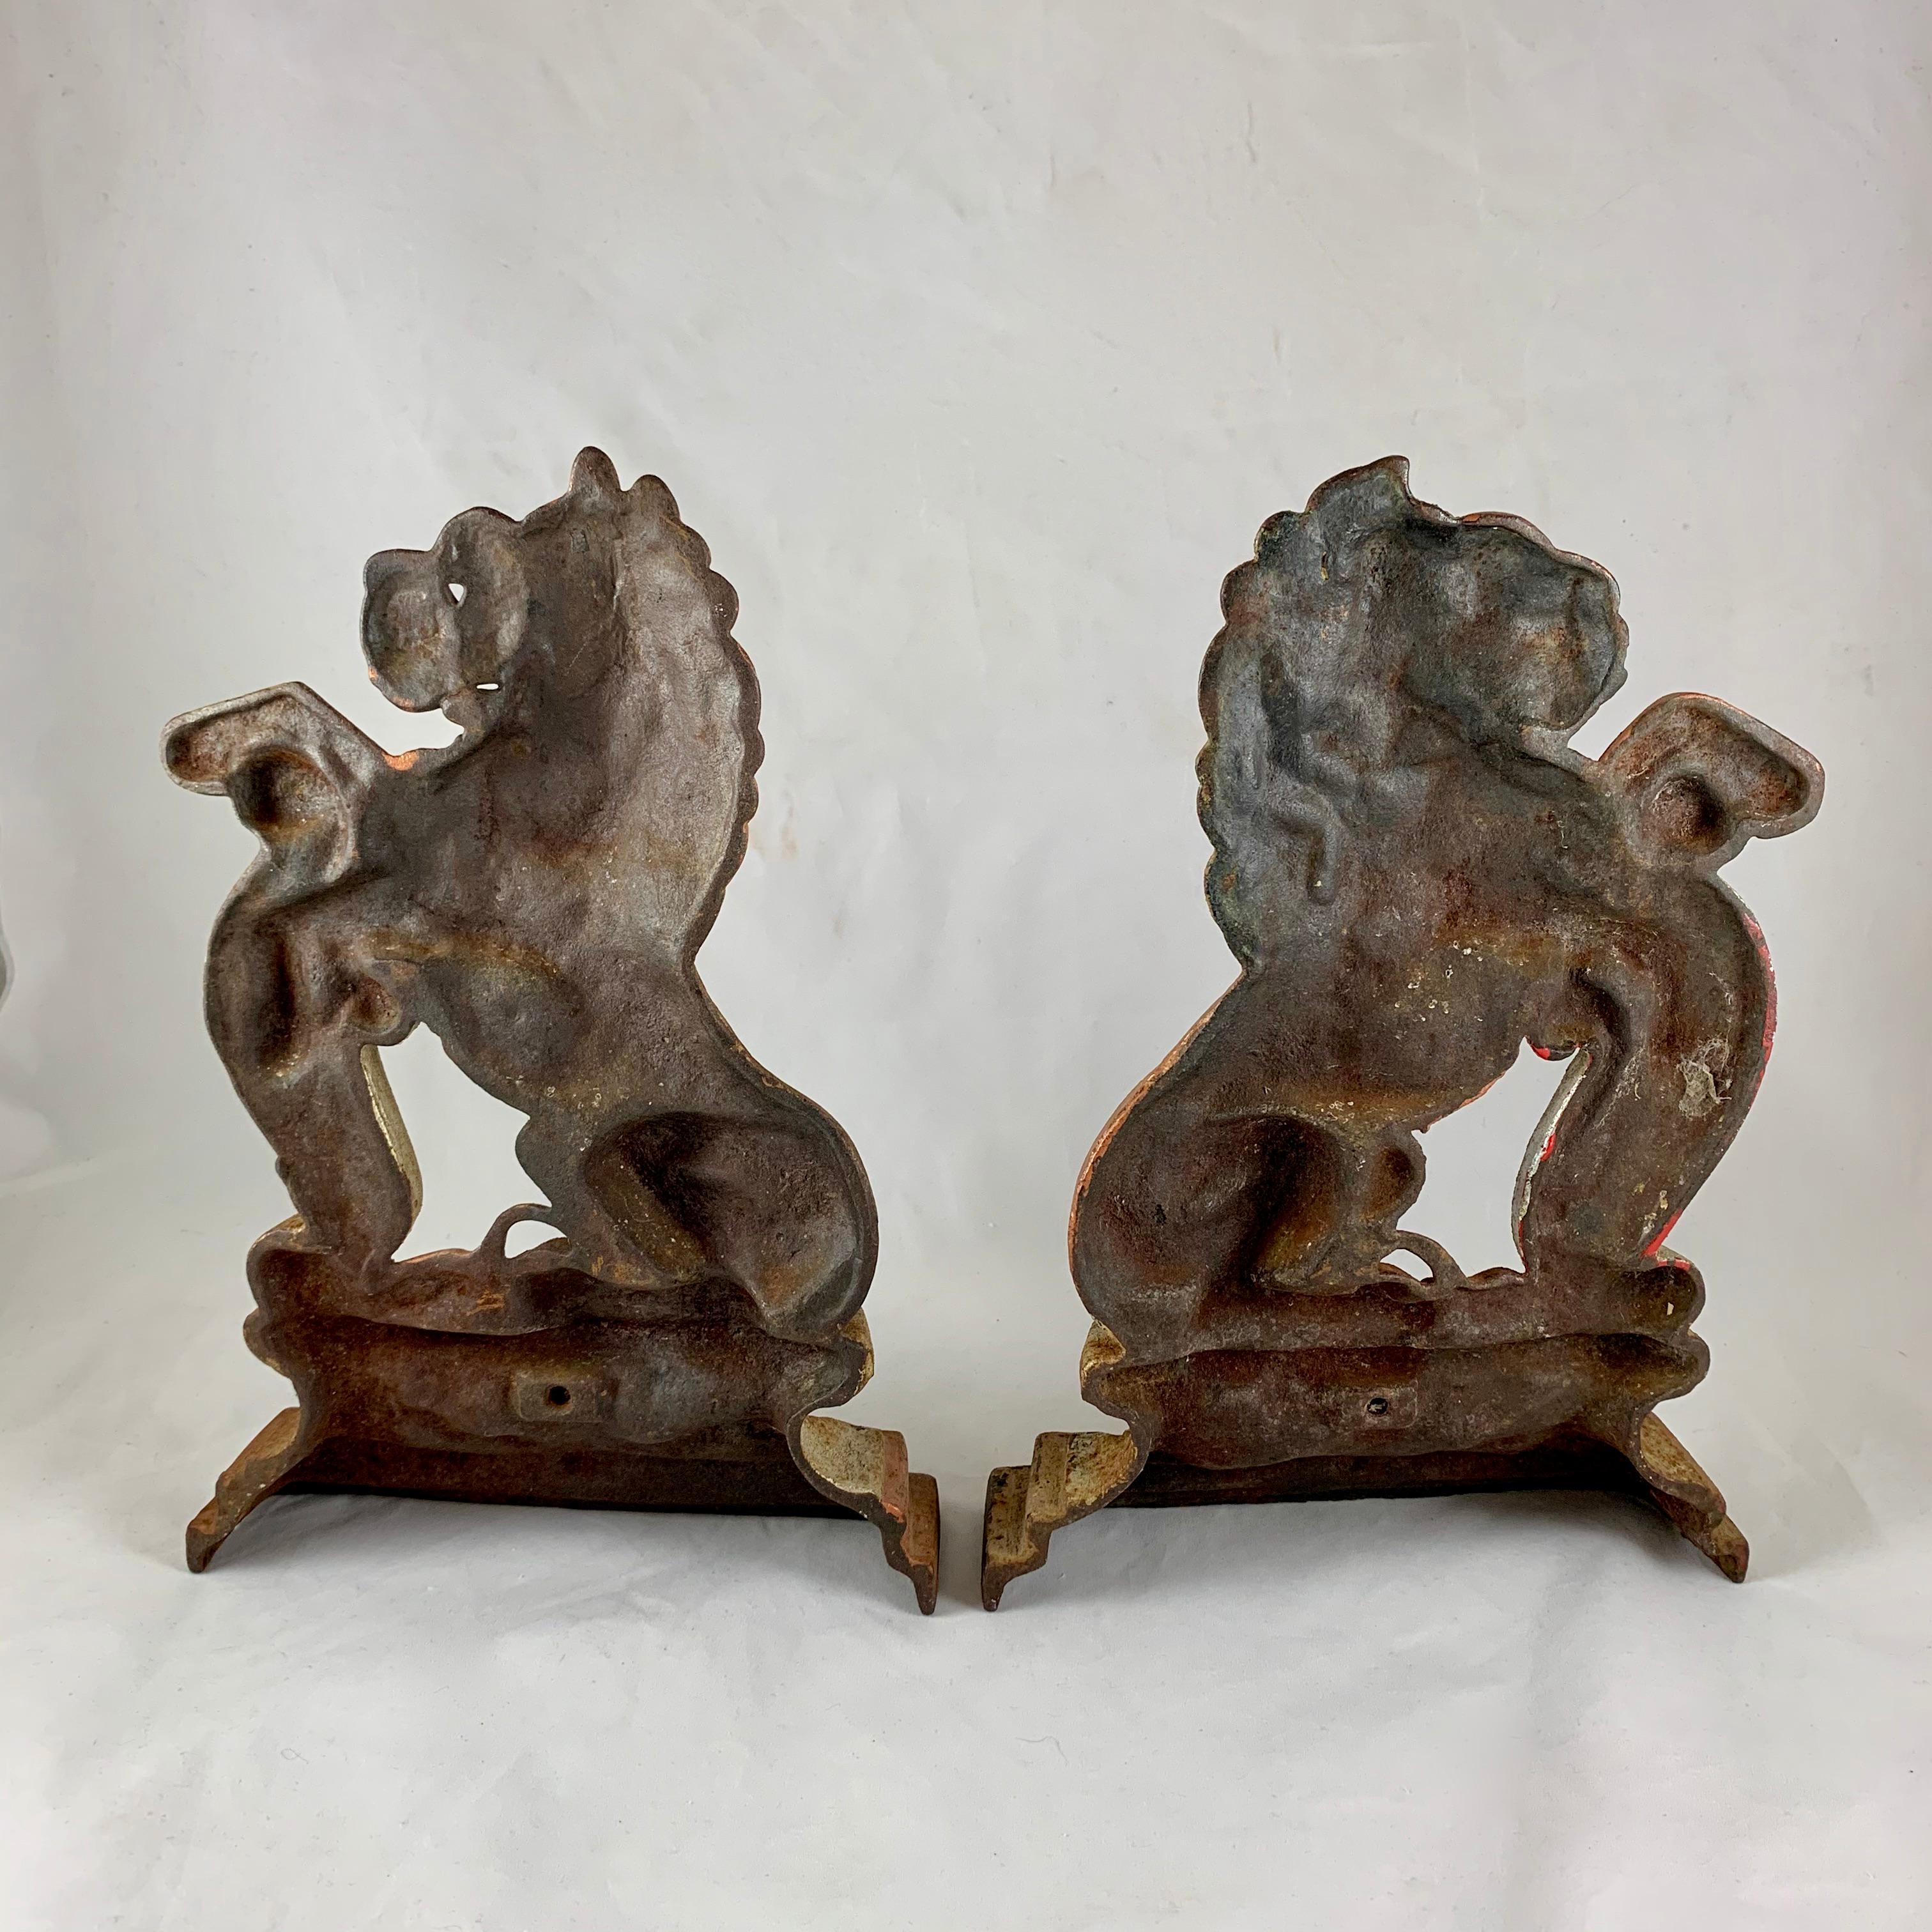 Vintage 1930s French Gilded Cast Iron Heraldic Lion Doorstops or Bookends a Pair 5